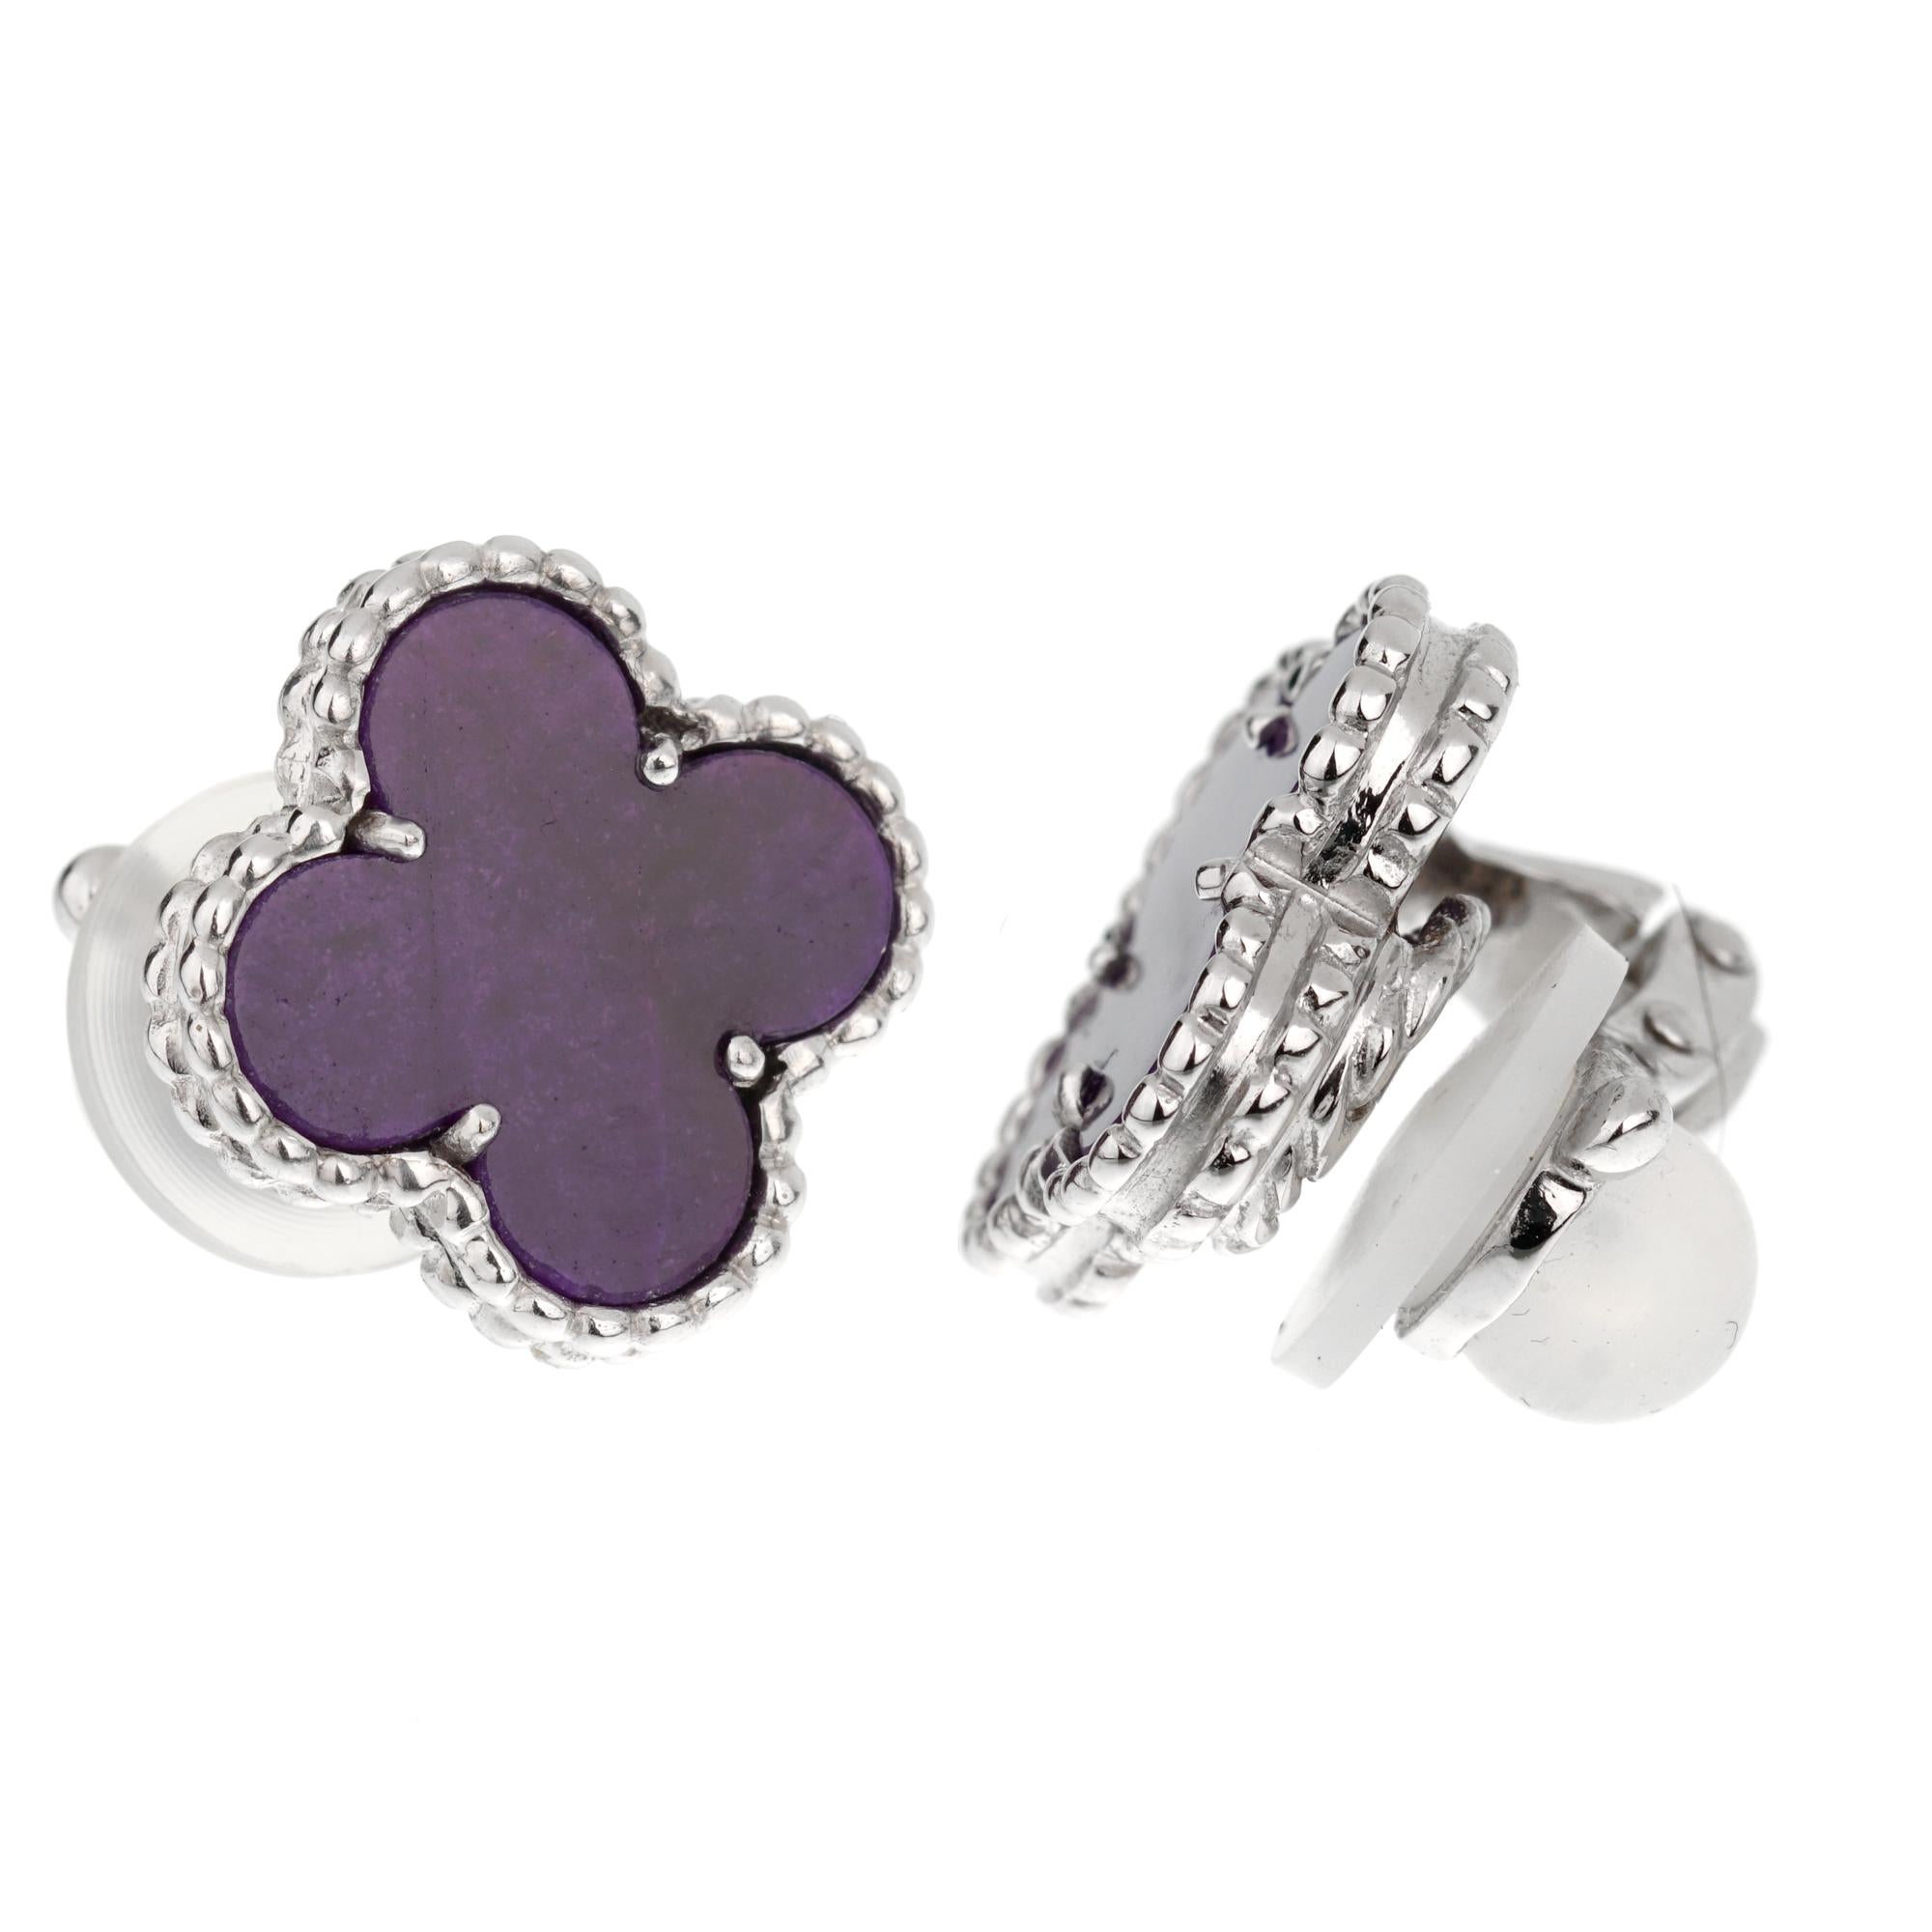 An incredibly rare set of Van Cleef & Arpels earrings showcasing 2 Sugilite stones in the shape of the lucky alhambra motif set in 18k white gold. The earrings are fully hallmarked, Vca, Serial, and 750.